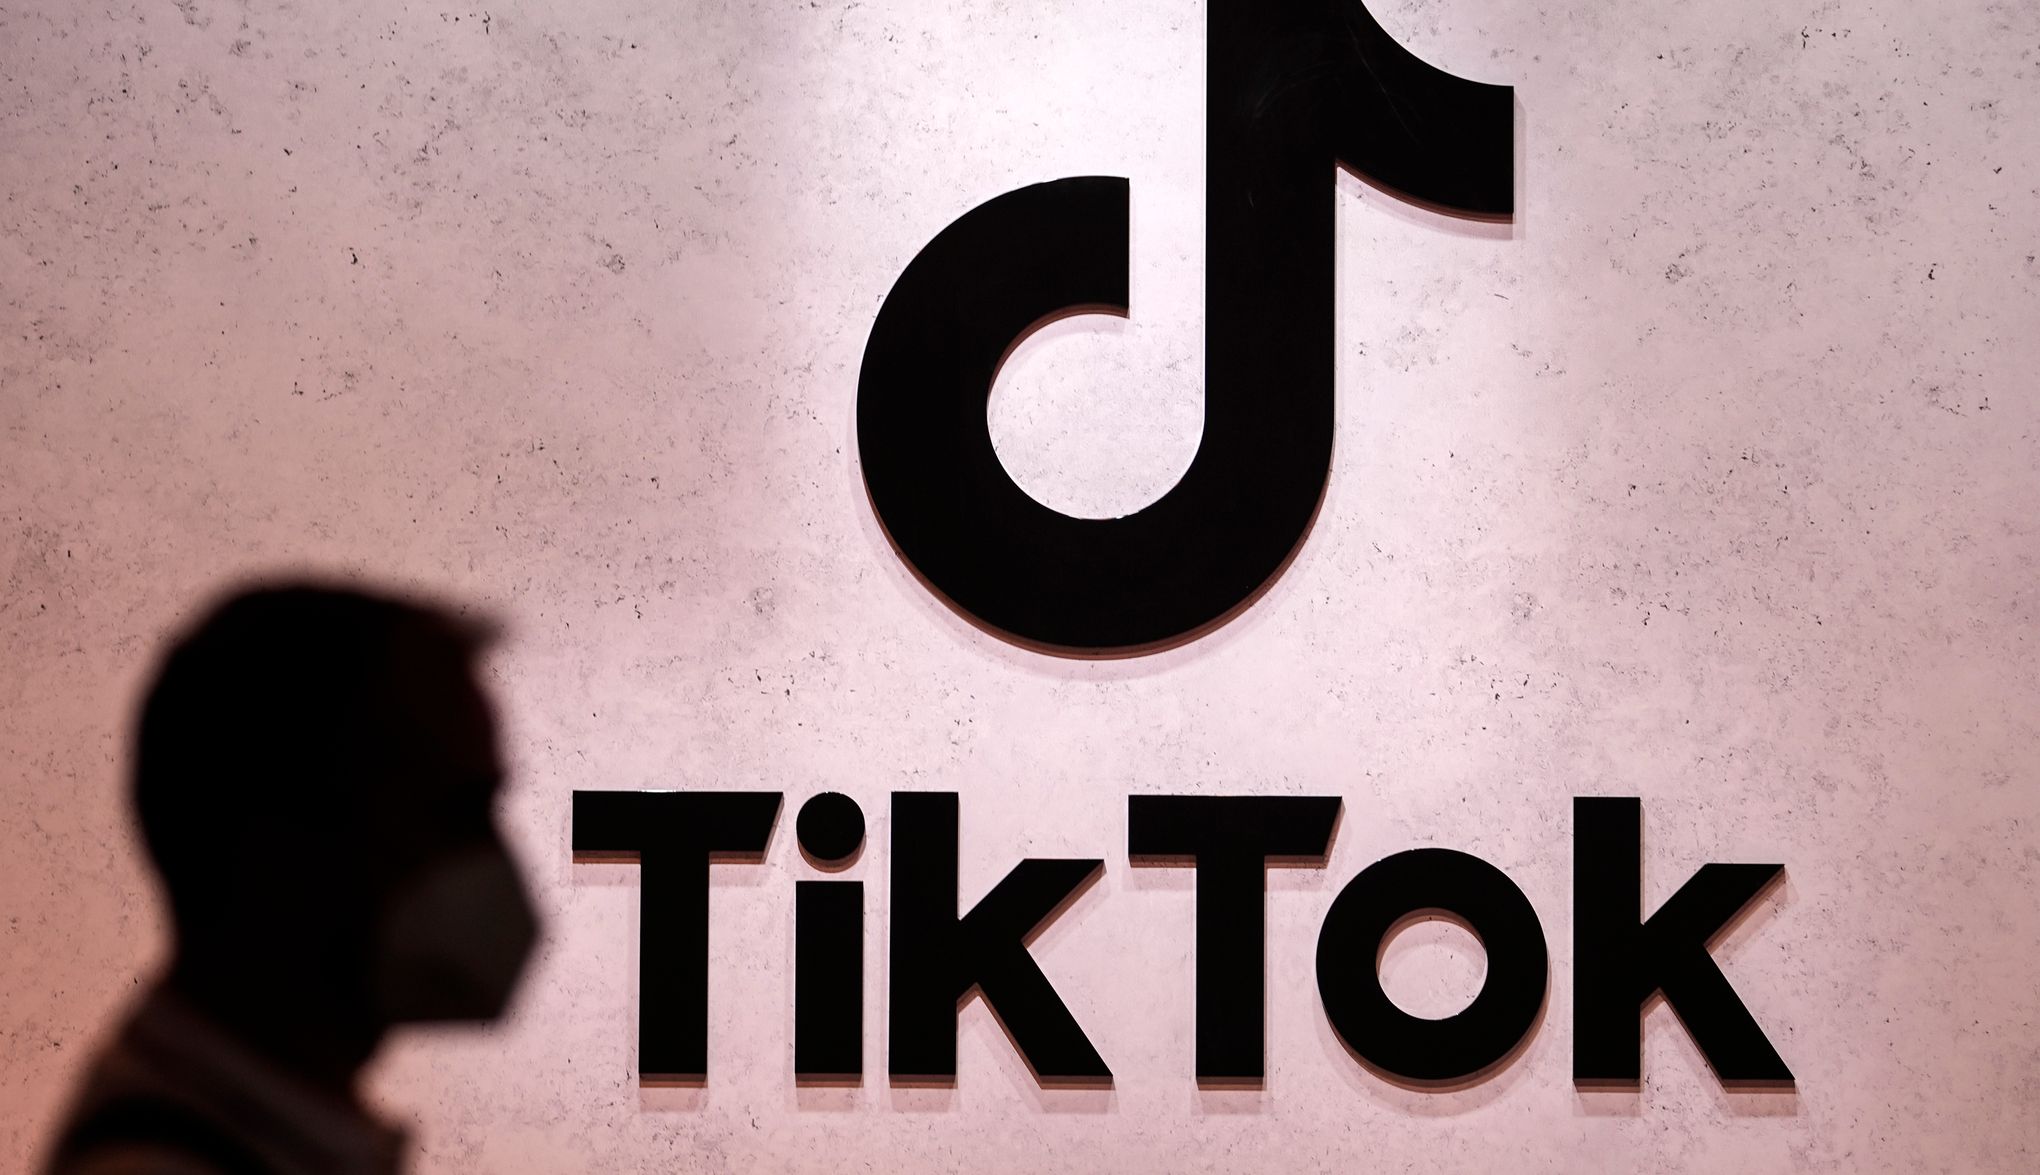 TikTok banned from EU Commission phones over cybersecurity